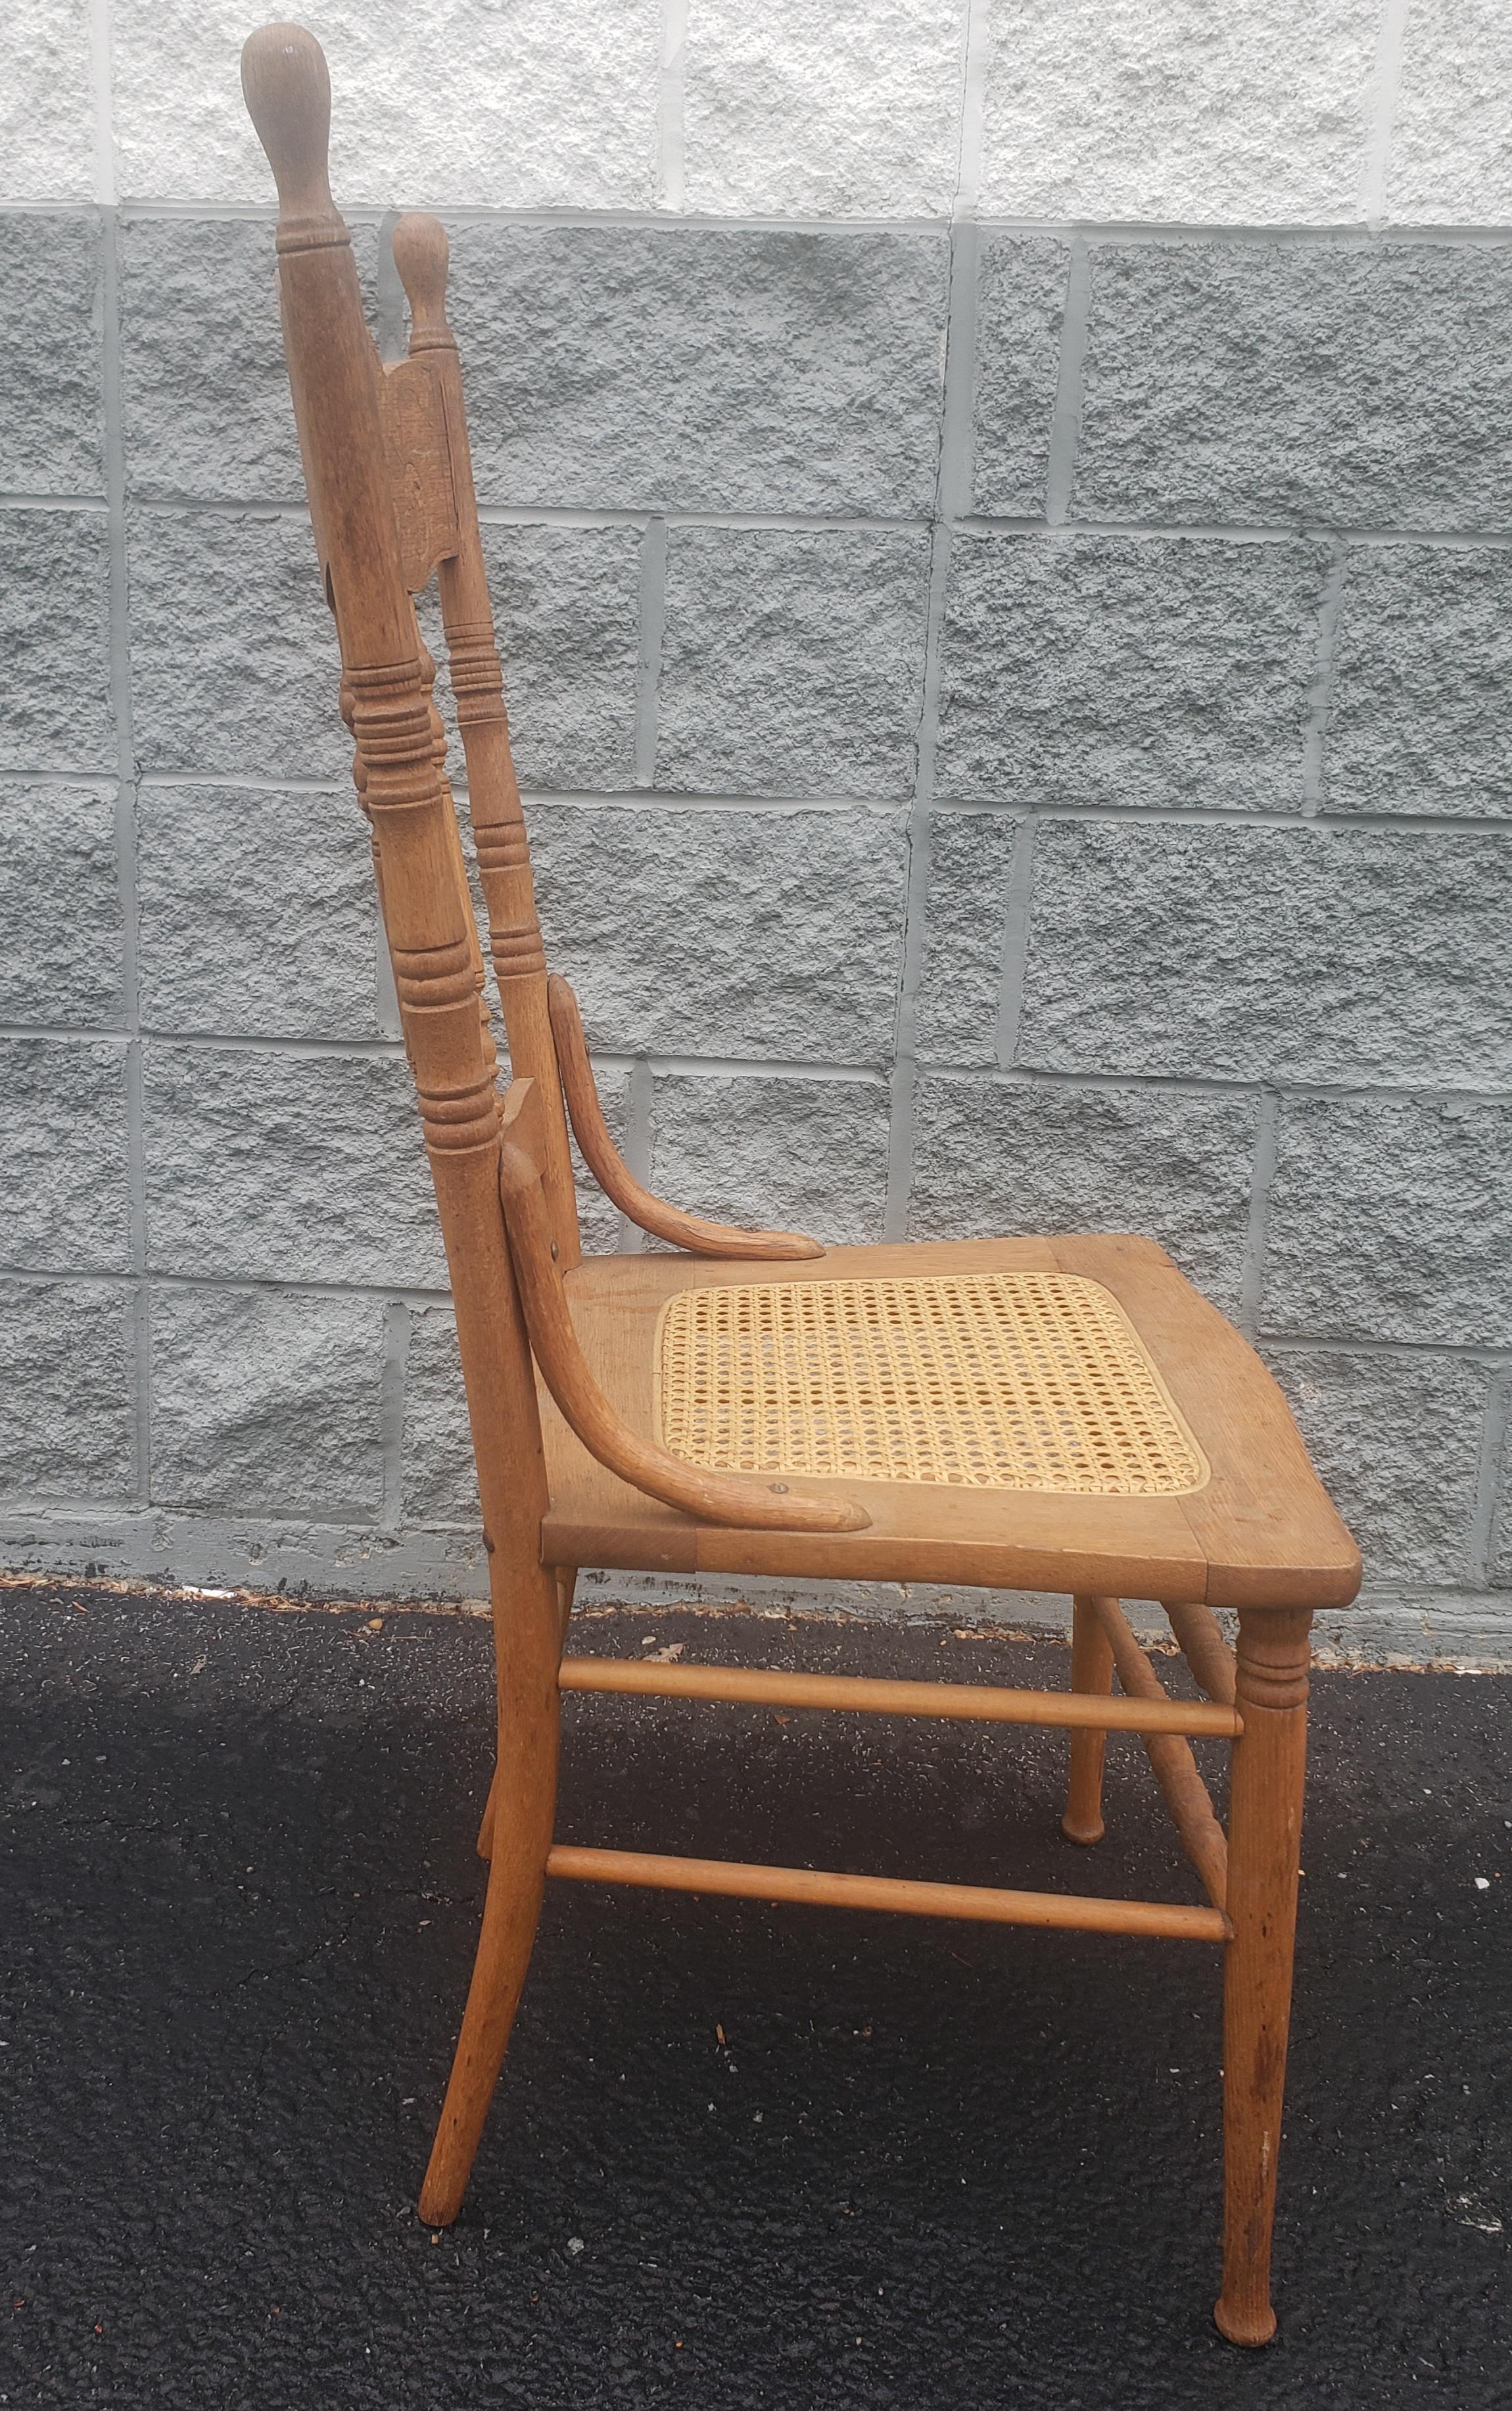 Midcentury pressback spindle oak country chair. High back. 
Measures 18